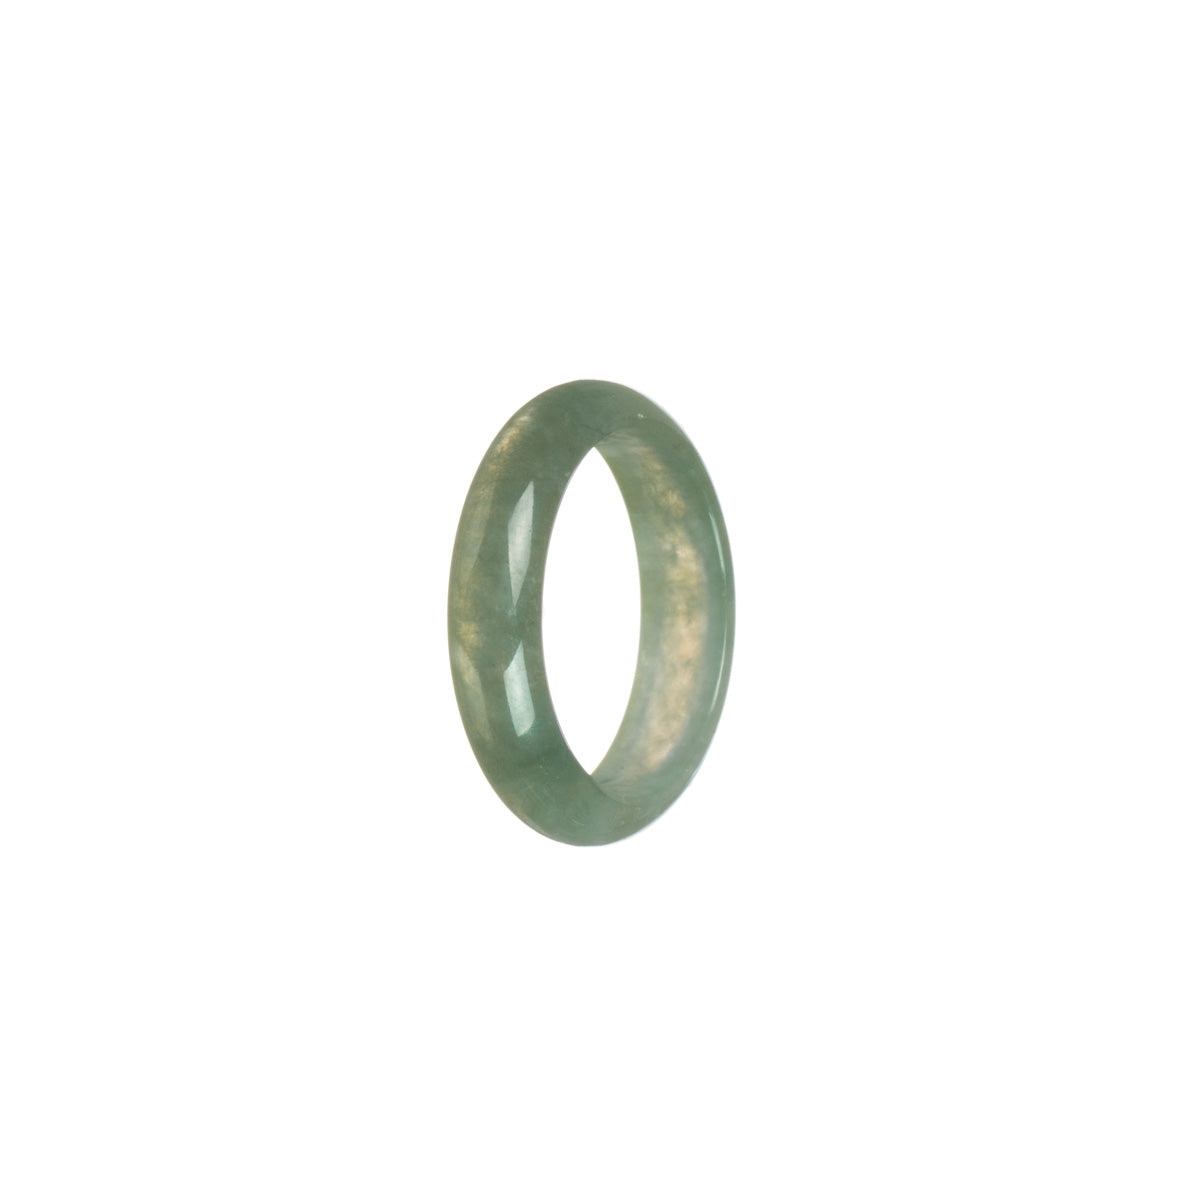 Authentic Icy Green Jadeite Jade Ring- Size S